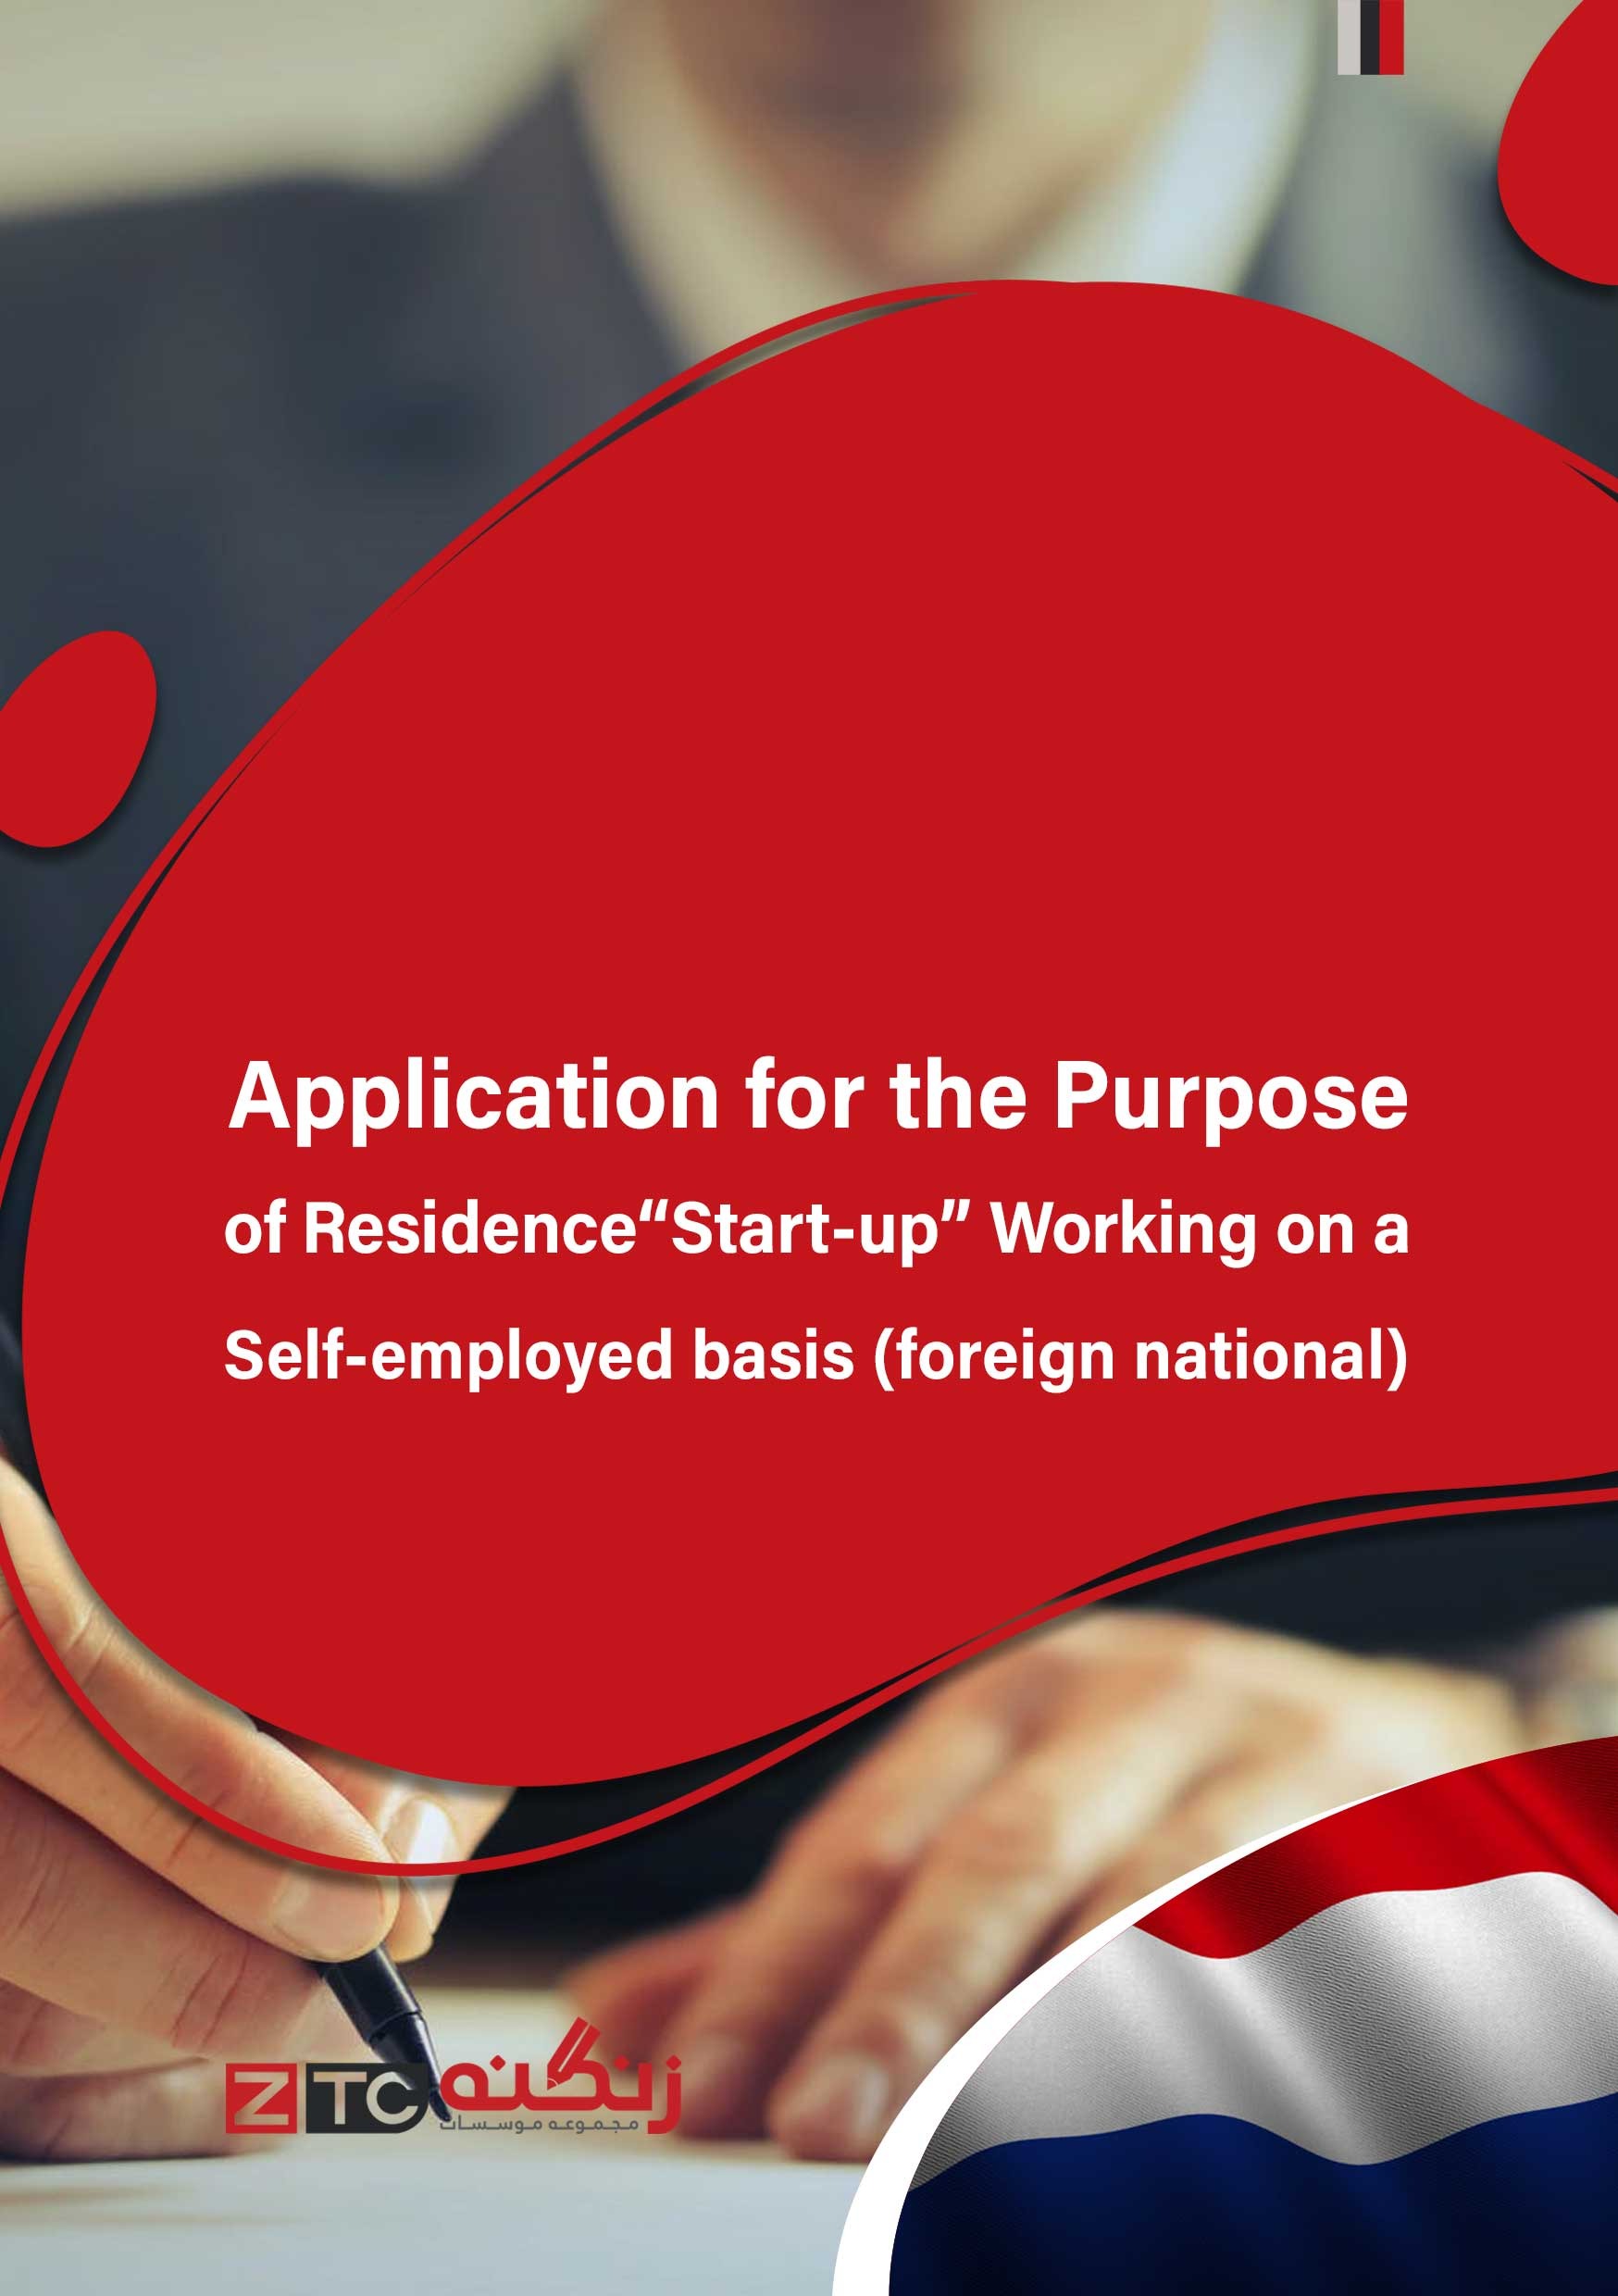 Application for the Purpose of Residence “Start-up” Working on a Self-employed basis (foreign national)